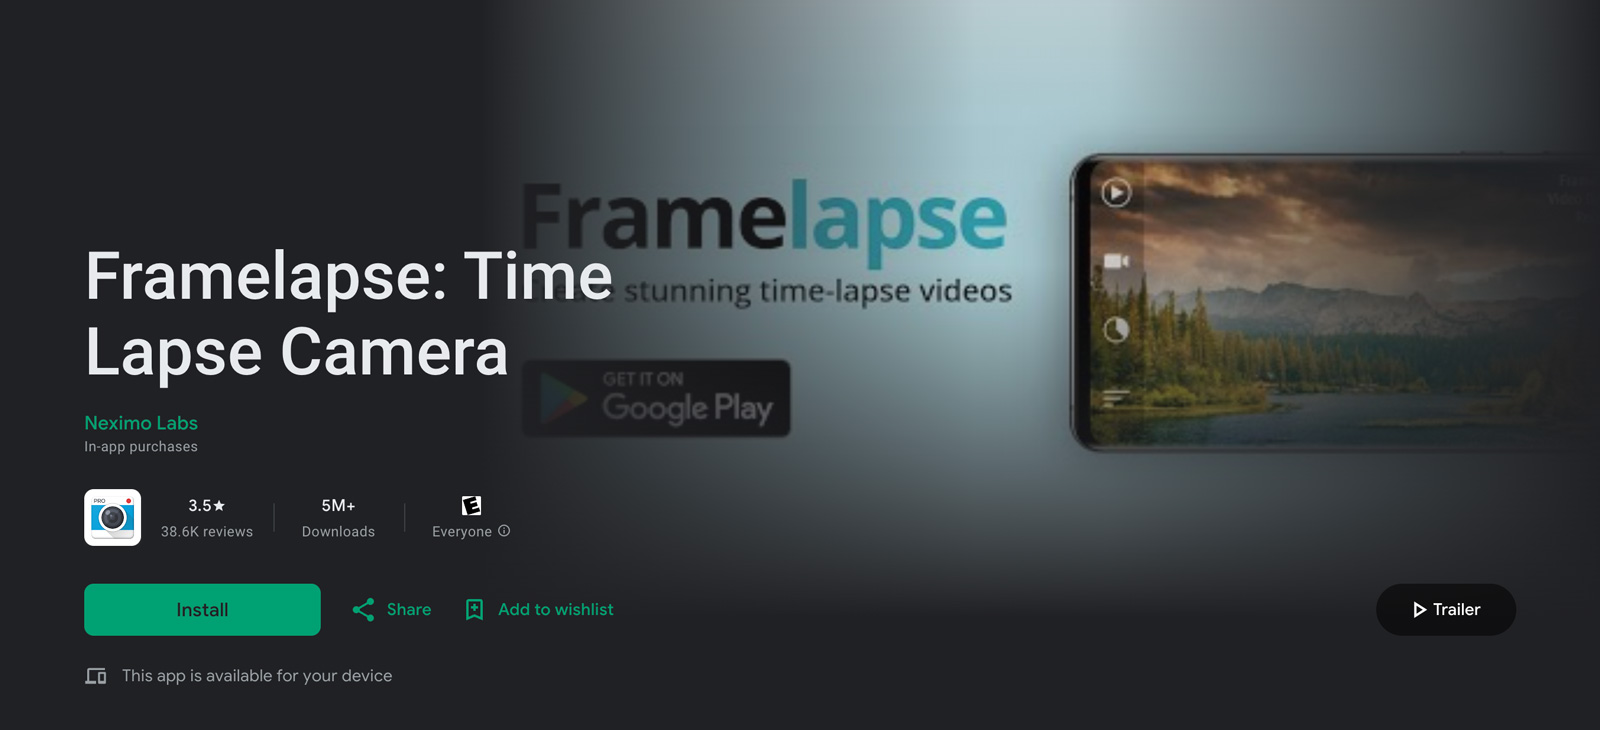 Framelapse Download from Google Play Store